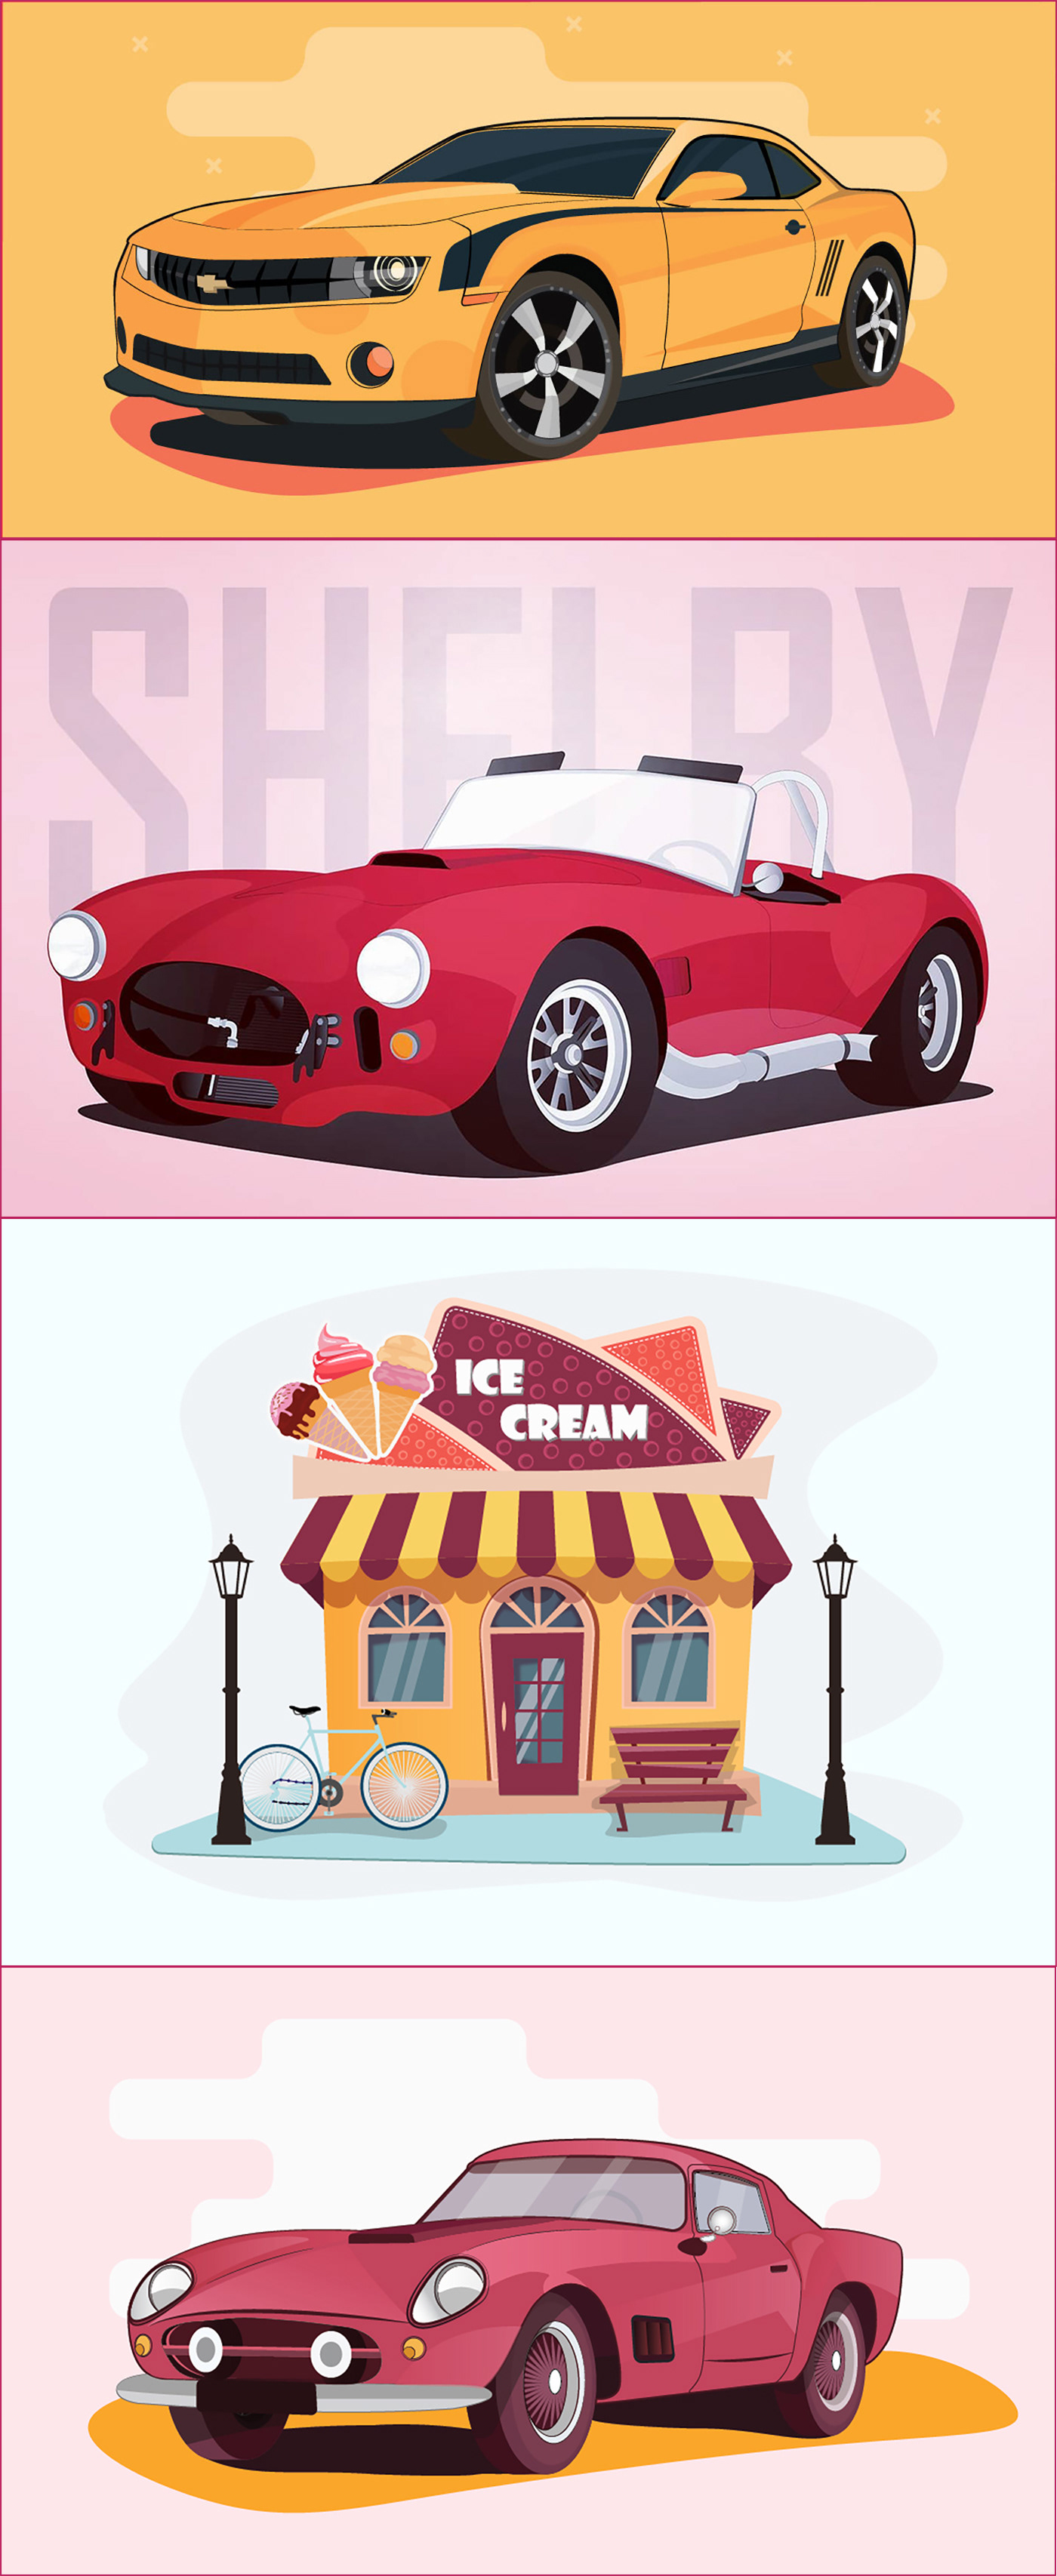 I have a passion for creating illustrations, with a particular focus on drawing cars.